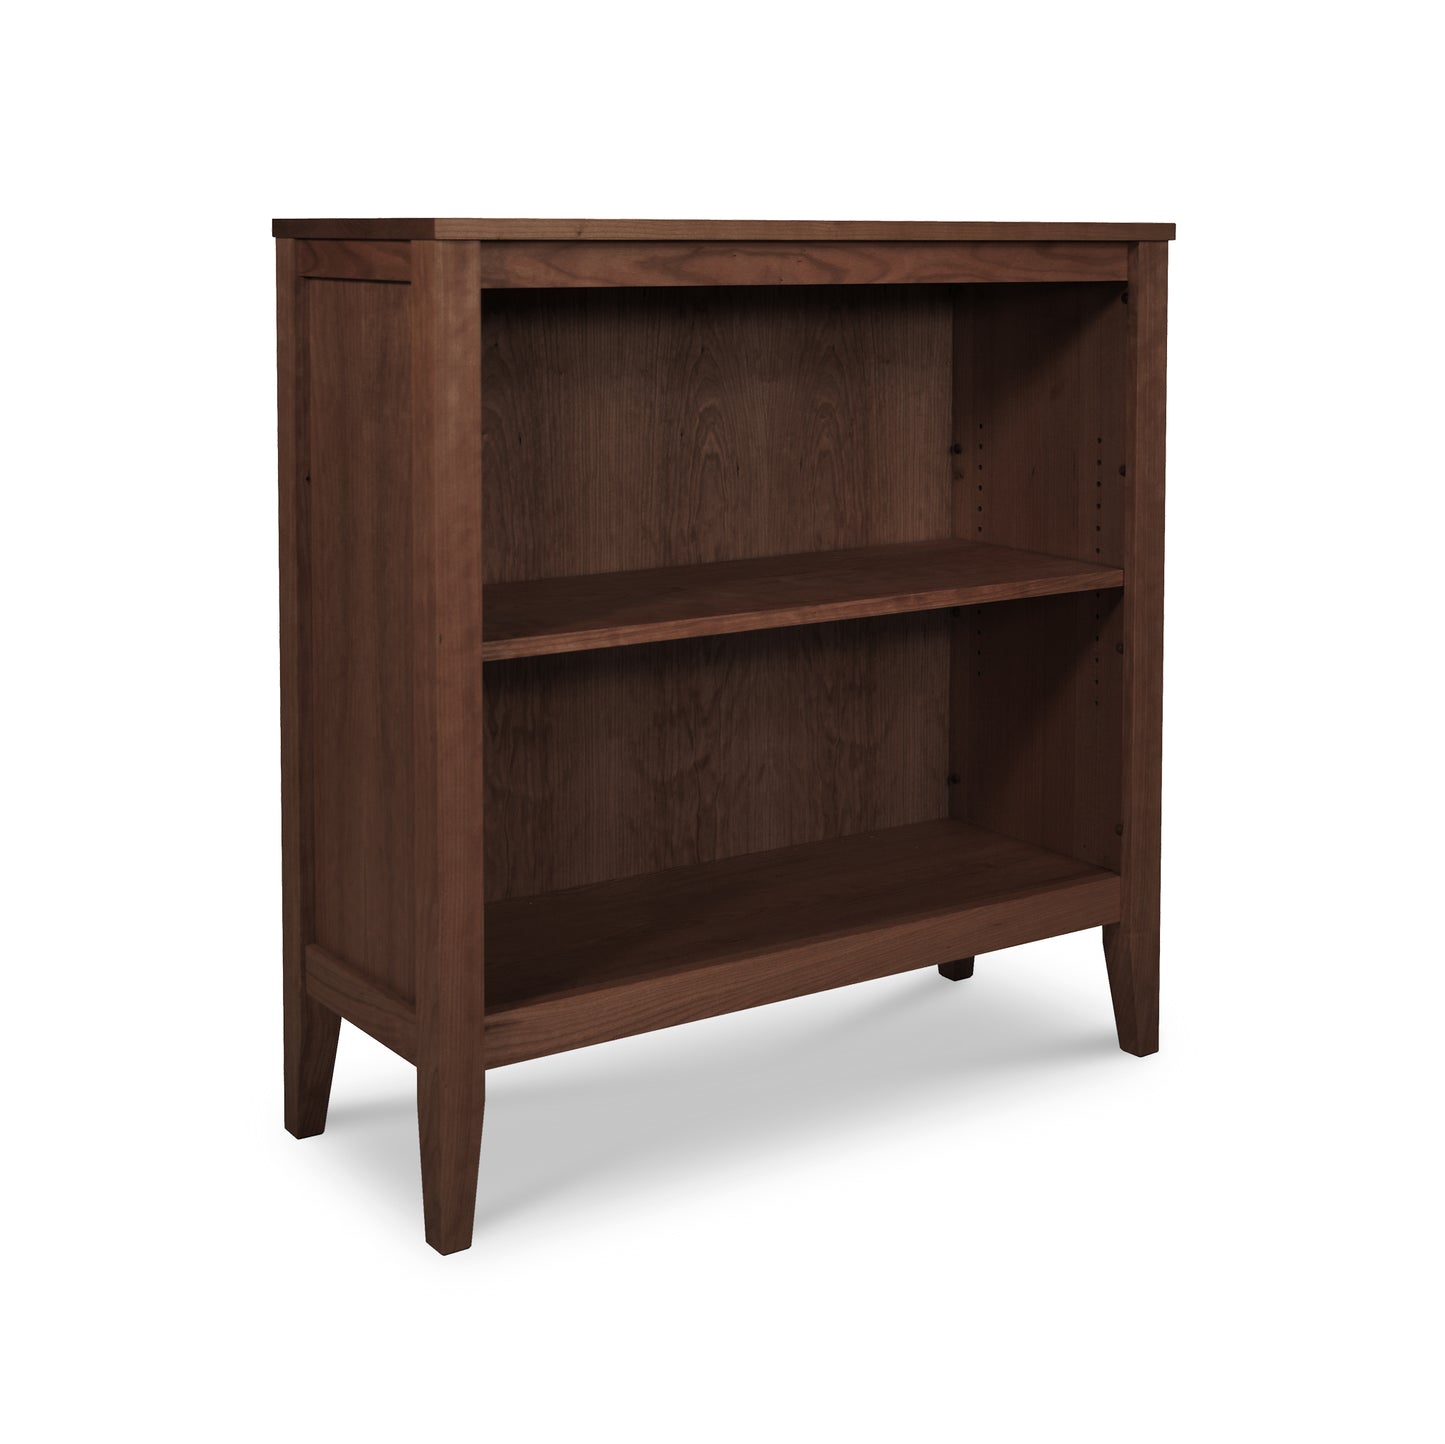 An Maple Corner Woodworks Andover Modern Bookcase, handcrafted from eco-friendly materials, featuring two shelves, isolated on a white background.